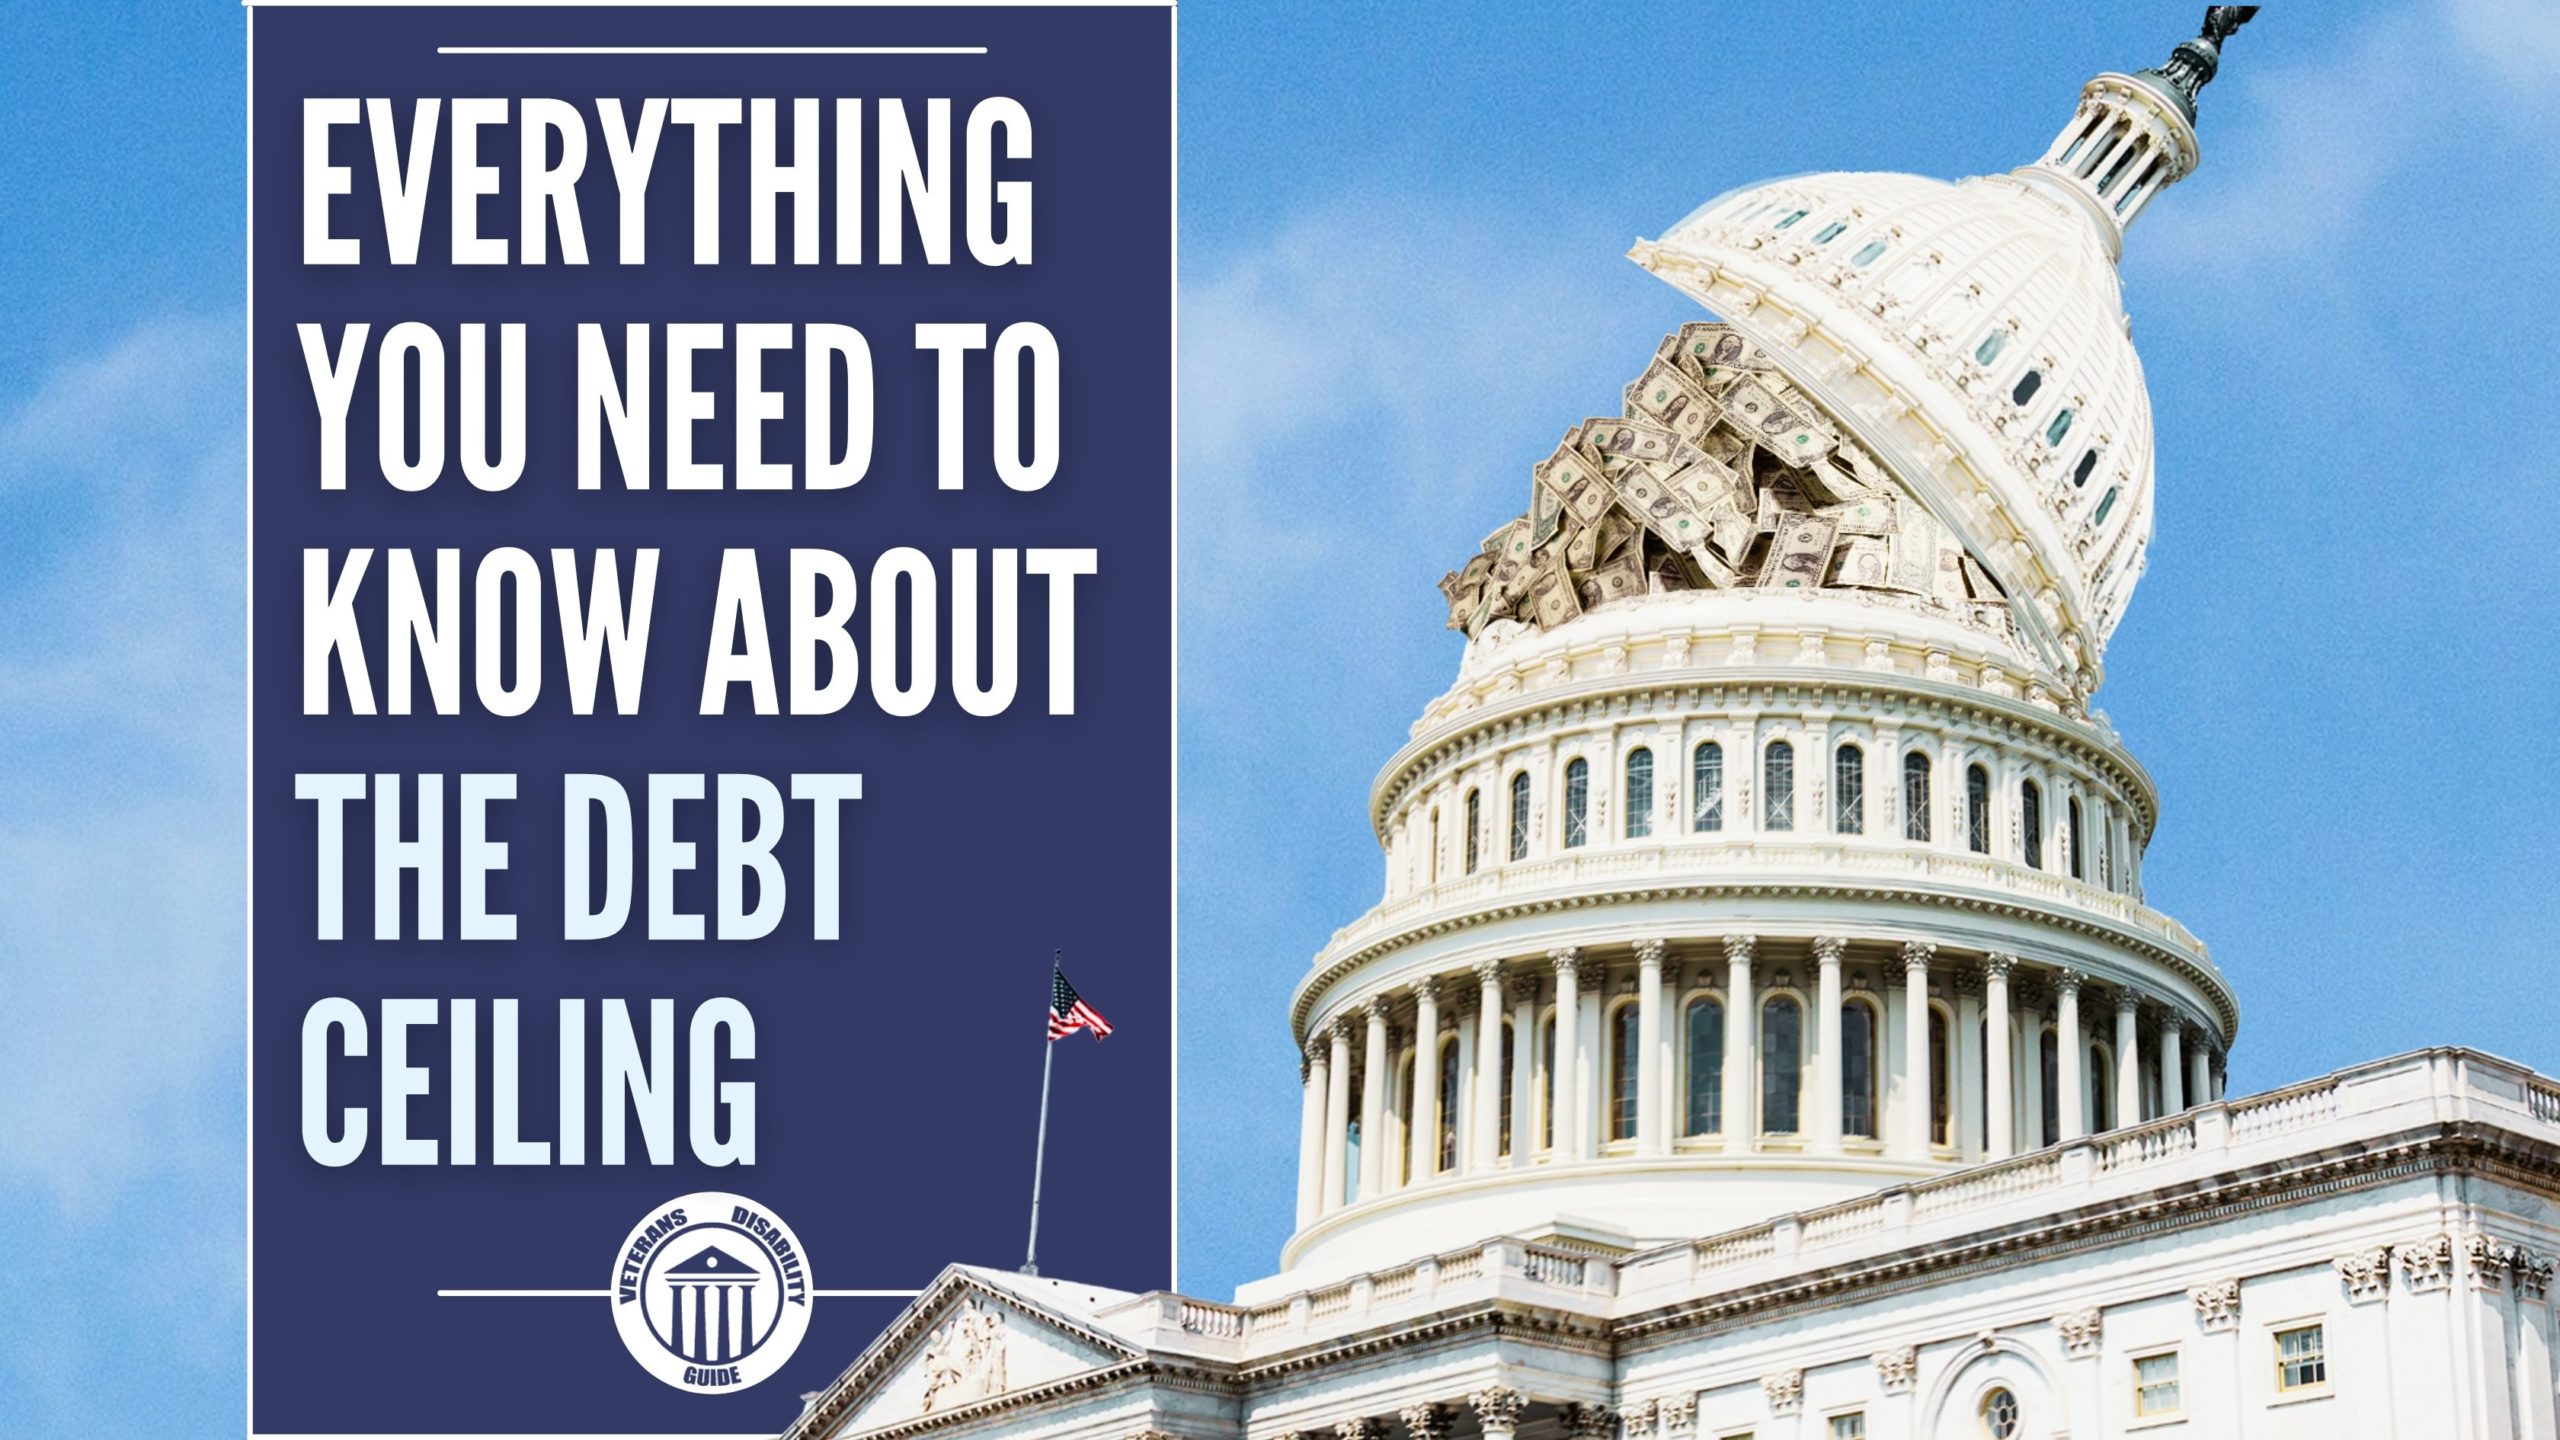 Everything You Need To Know About The Debt Ceiling blog header image